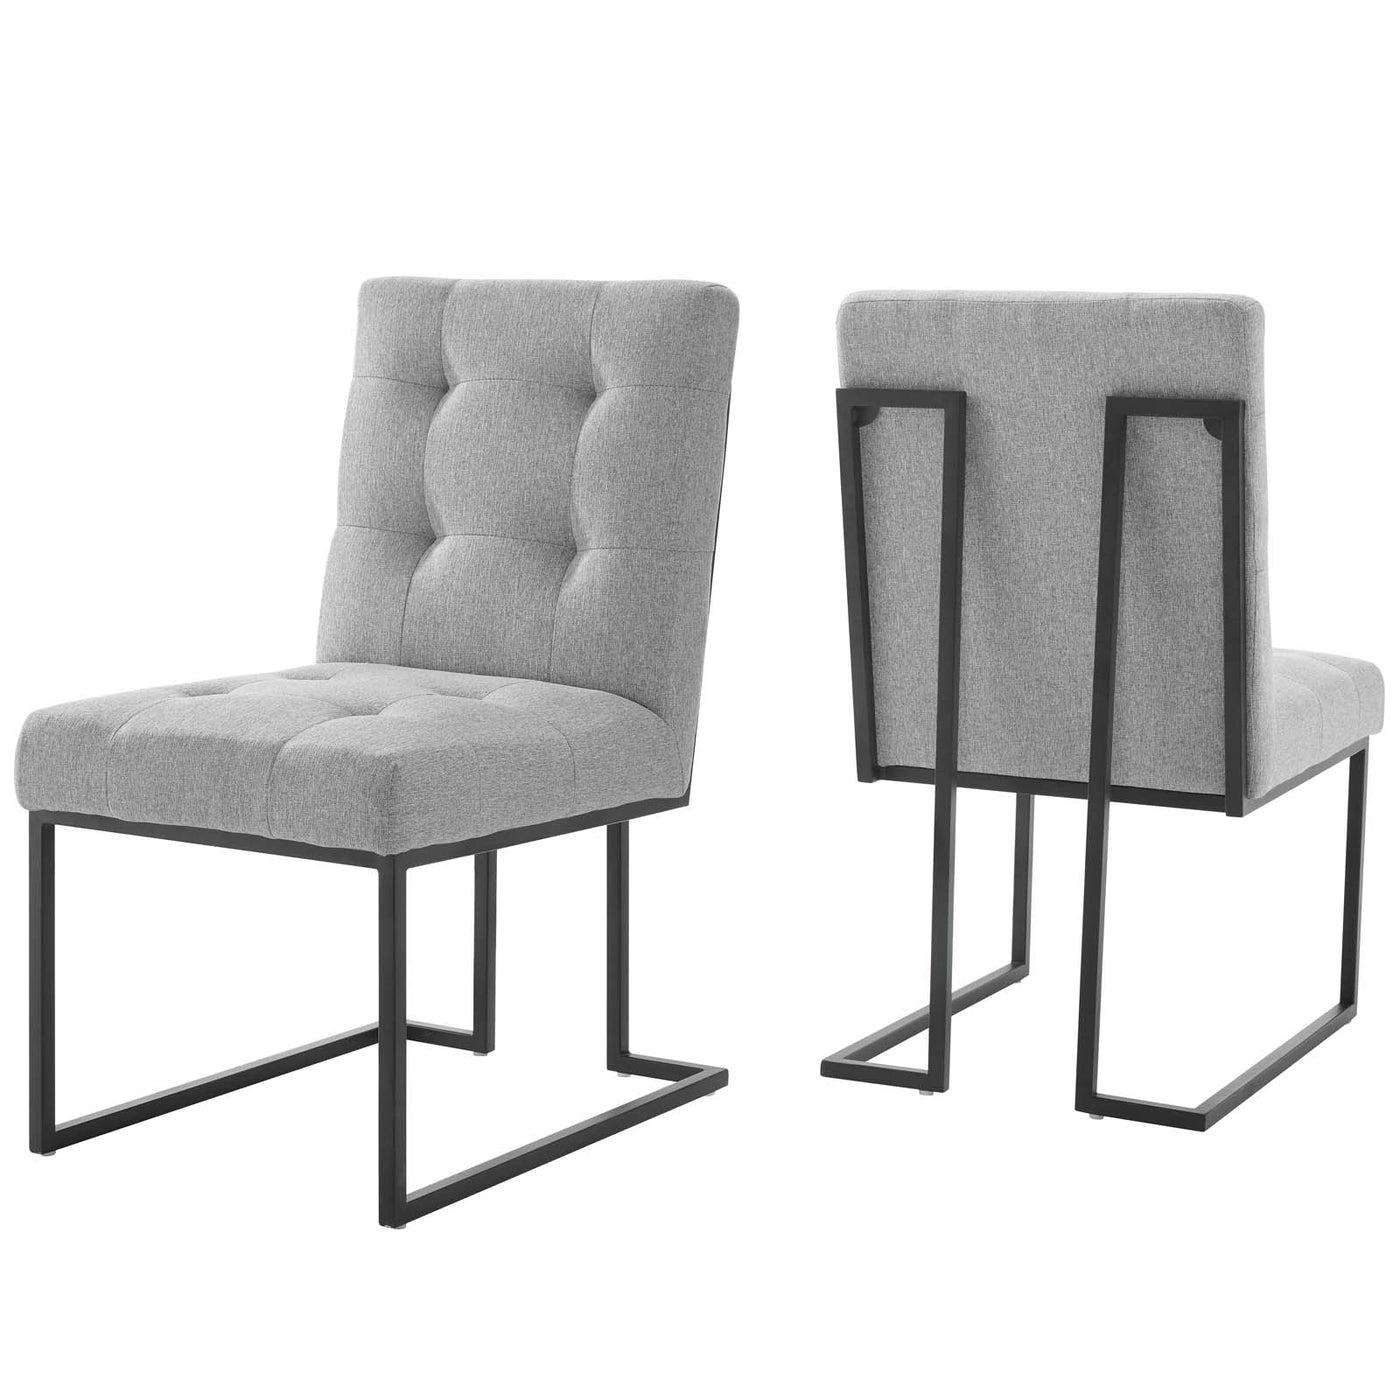 Privy Black Stainless Steel Upholstered Fabric Dining Chair Set of 2